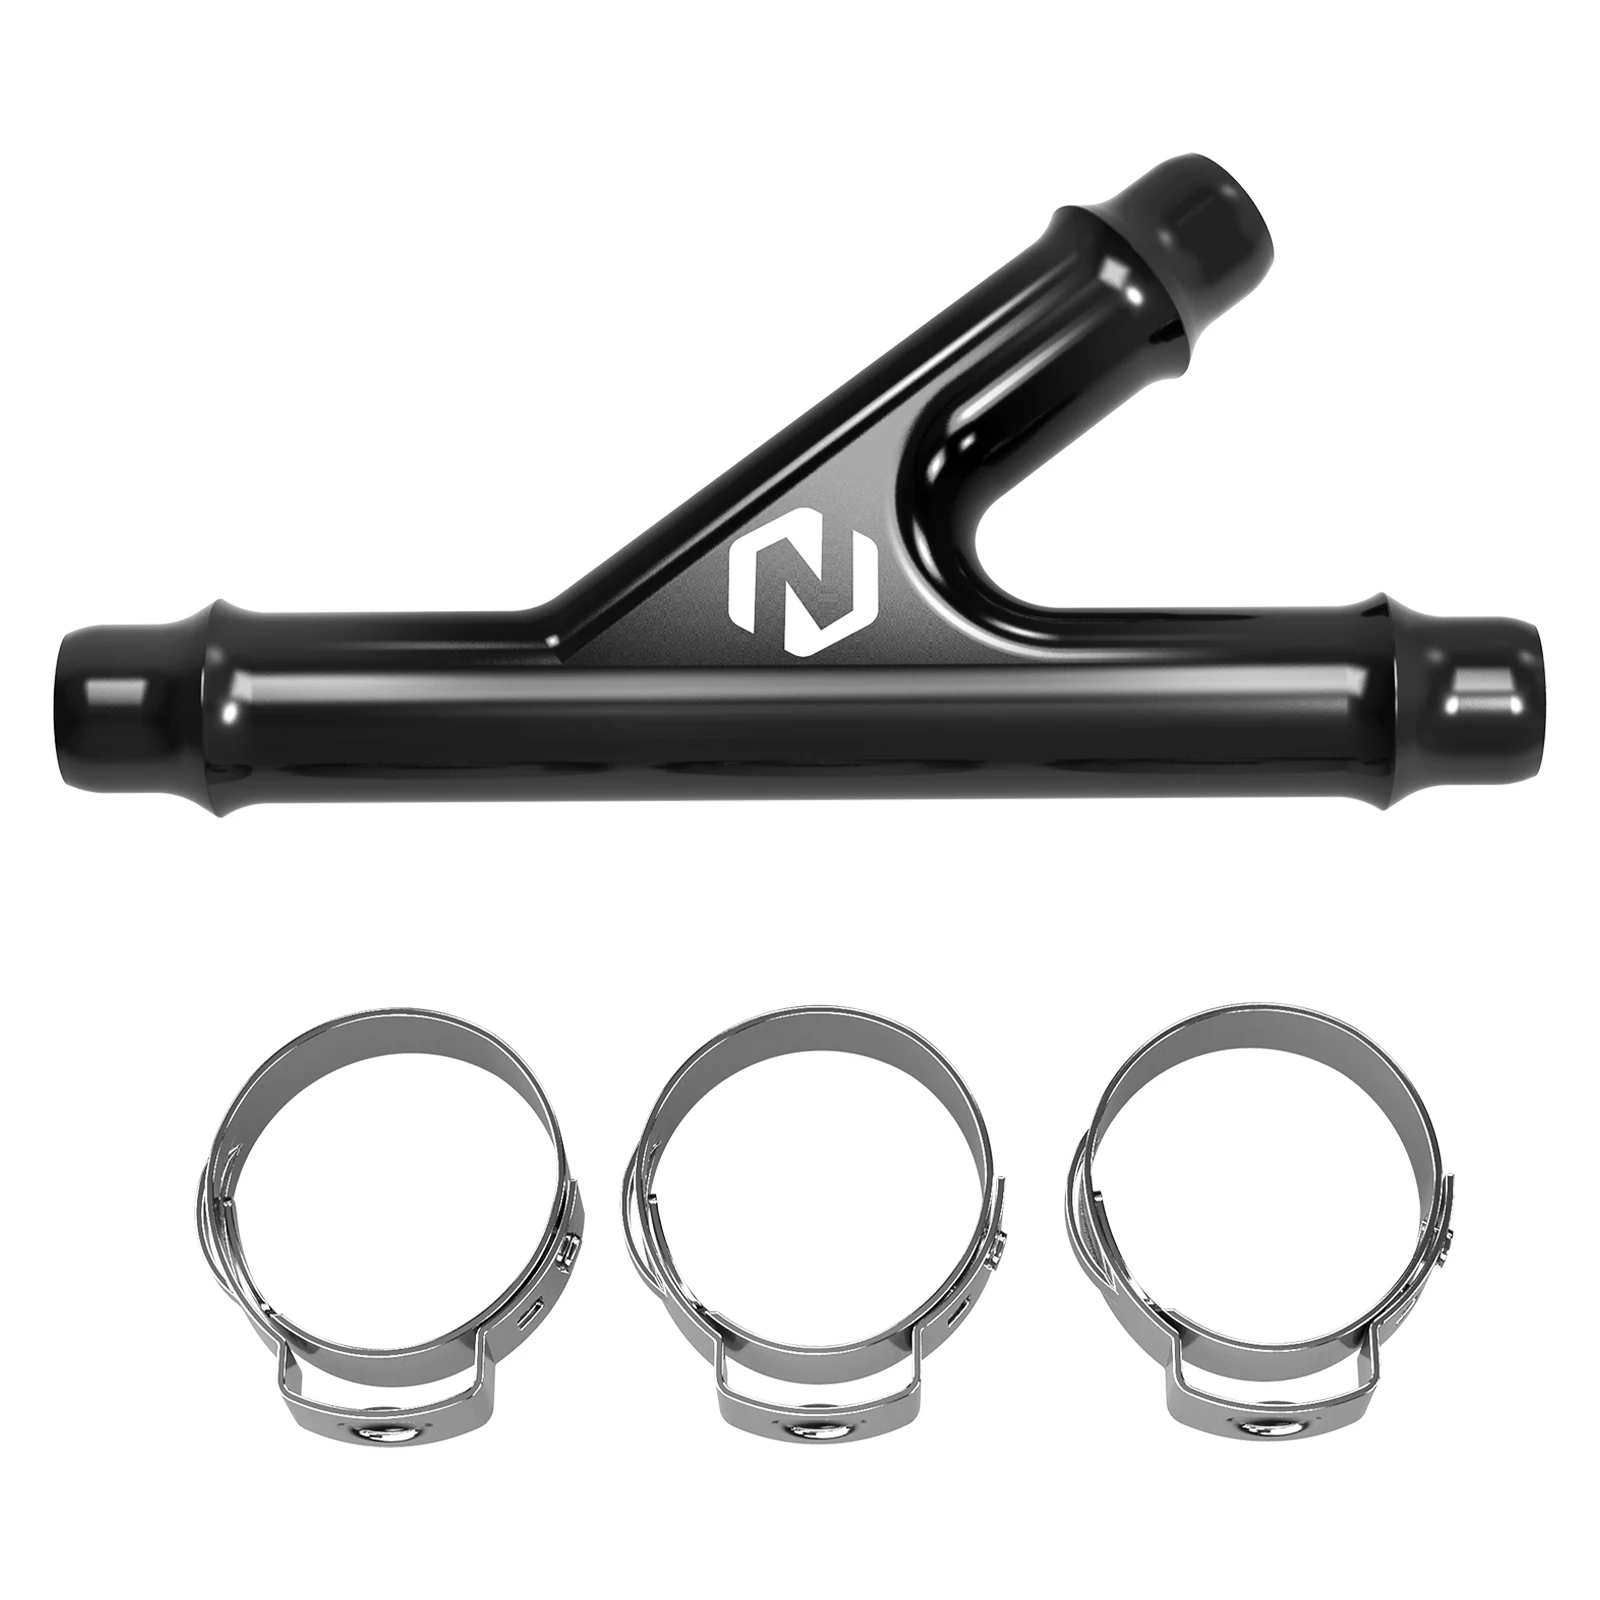 

For Outlander Max UTV Y Fitting with Hose Clamps For Can-Am Maverick X3 Defender Renegade 570 Commander 1000 1000R 800 Aluminum